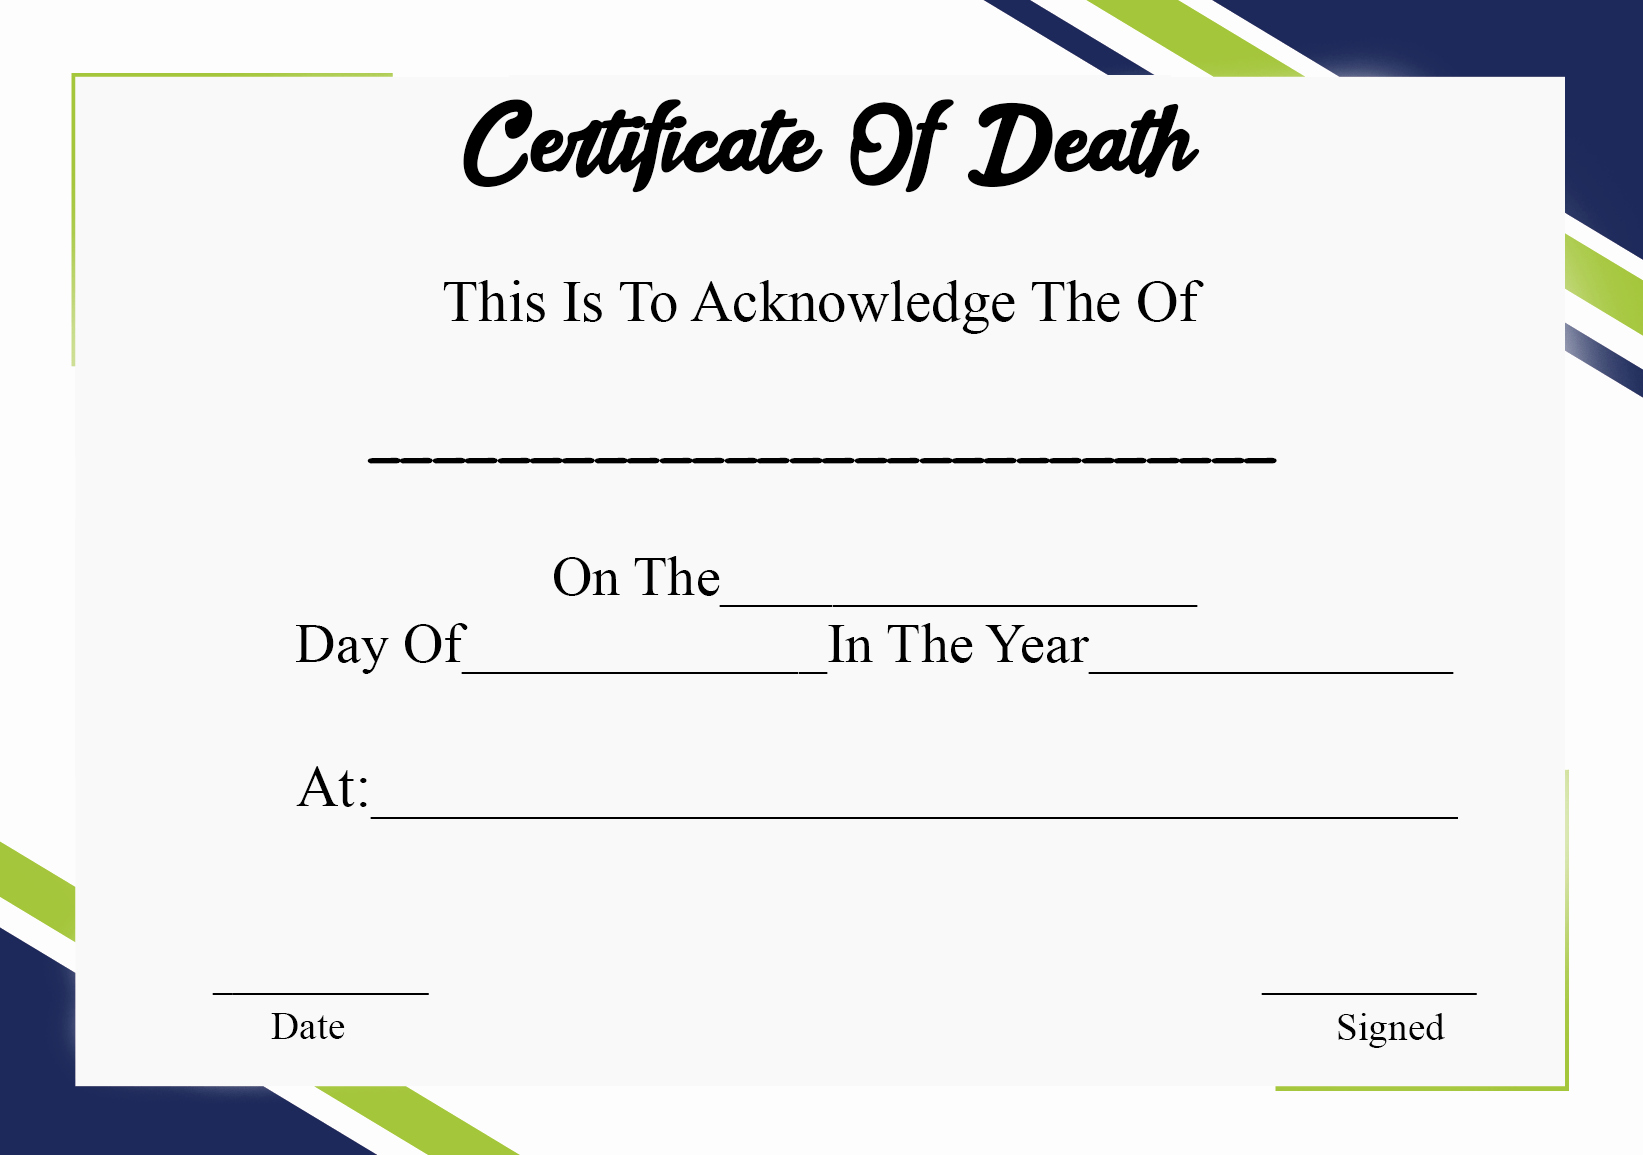 Blank Death Certificate Template Awesome 5 Printable Certificate Death Templates with Samples